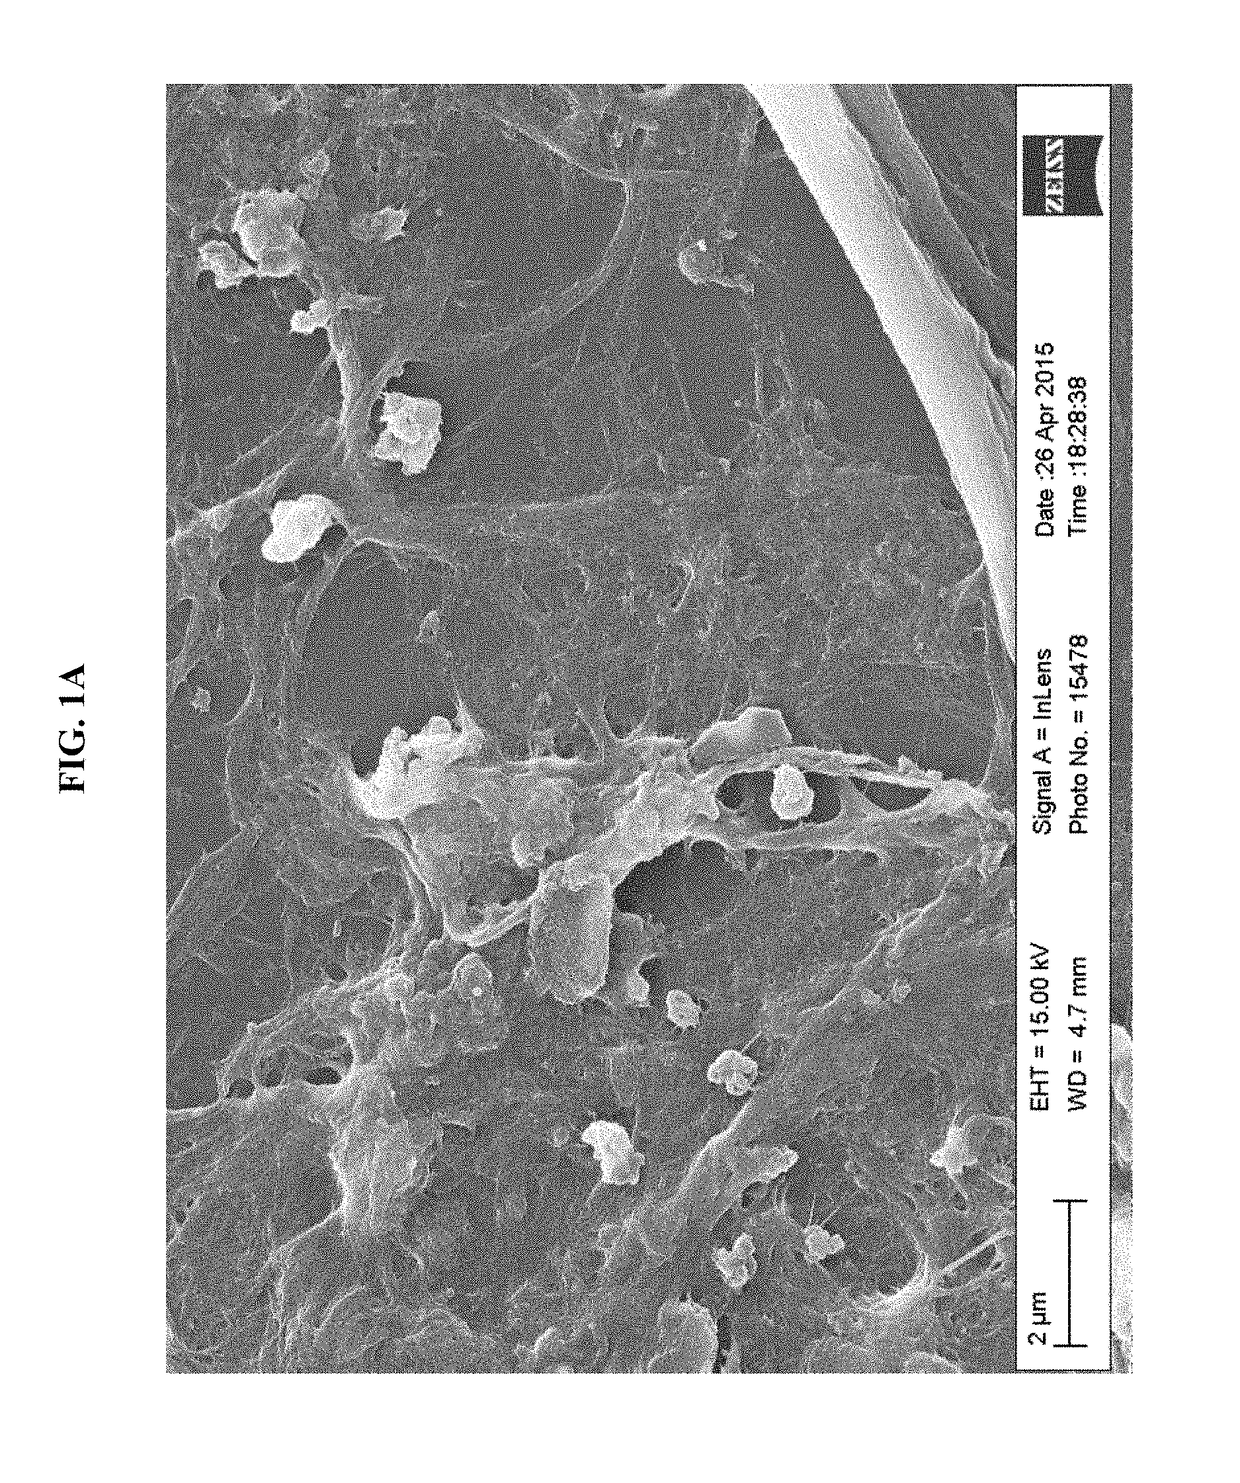 Processes for producing nanocellulose, and nanocellulose compositions produced therefrom